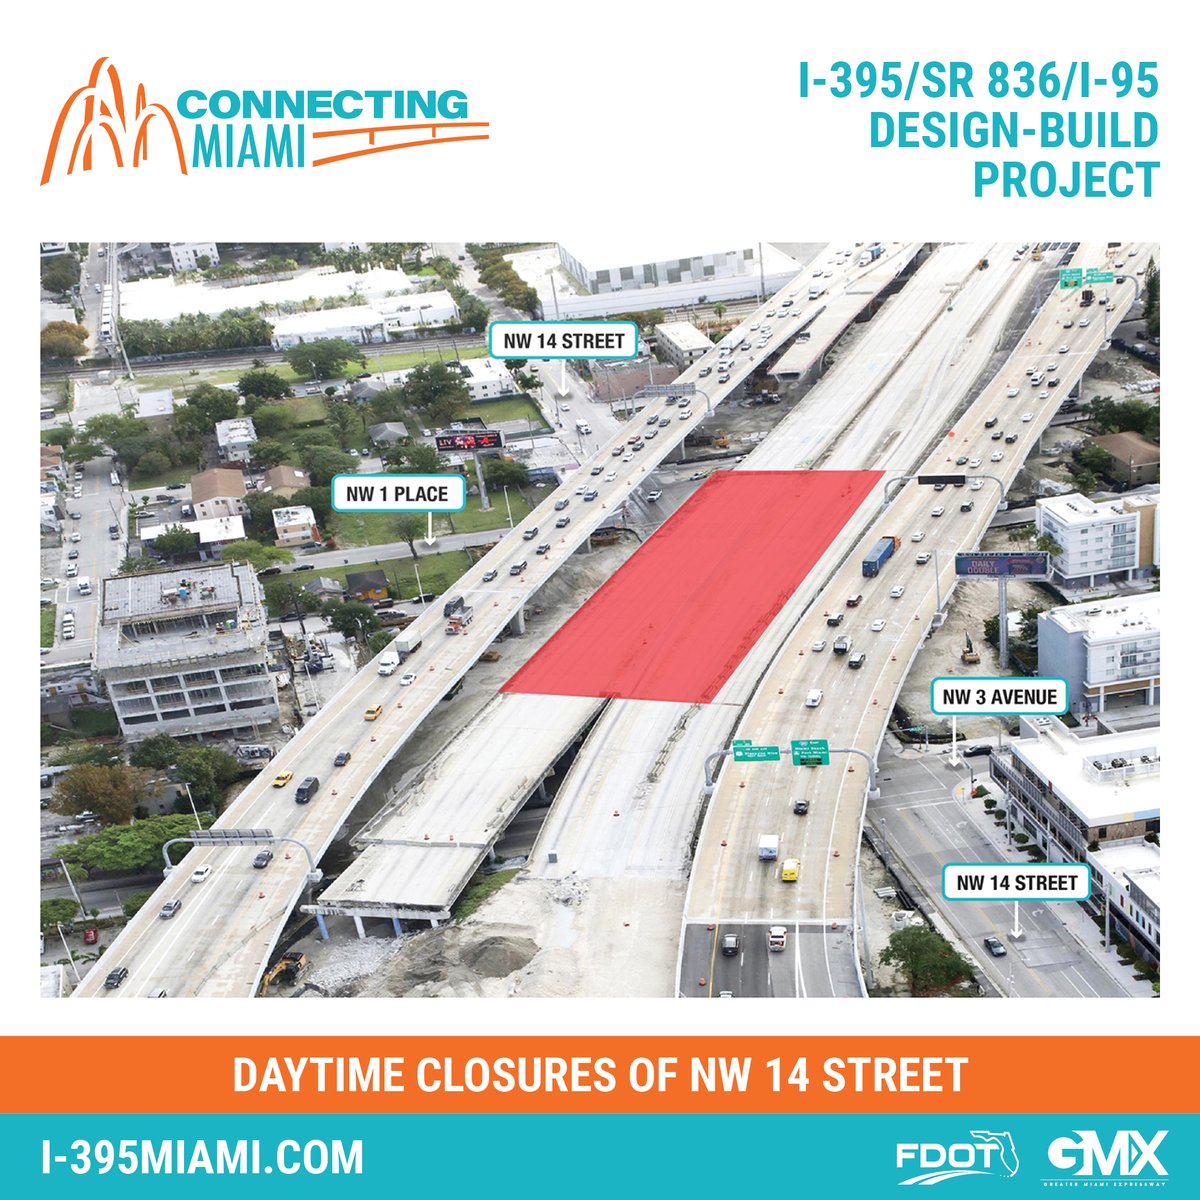 Daytime closures of NW 14 Street from NW 3 Avenue to NW 1 Place are being implemented daily to safely remove bridge sections over the roadway. For additional information on the closures and detours, please visit tinyurl.com/597j8eyb